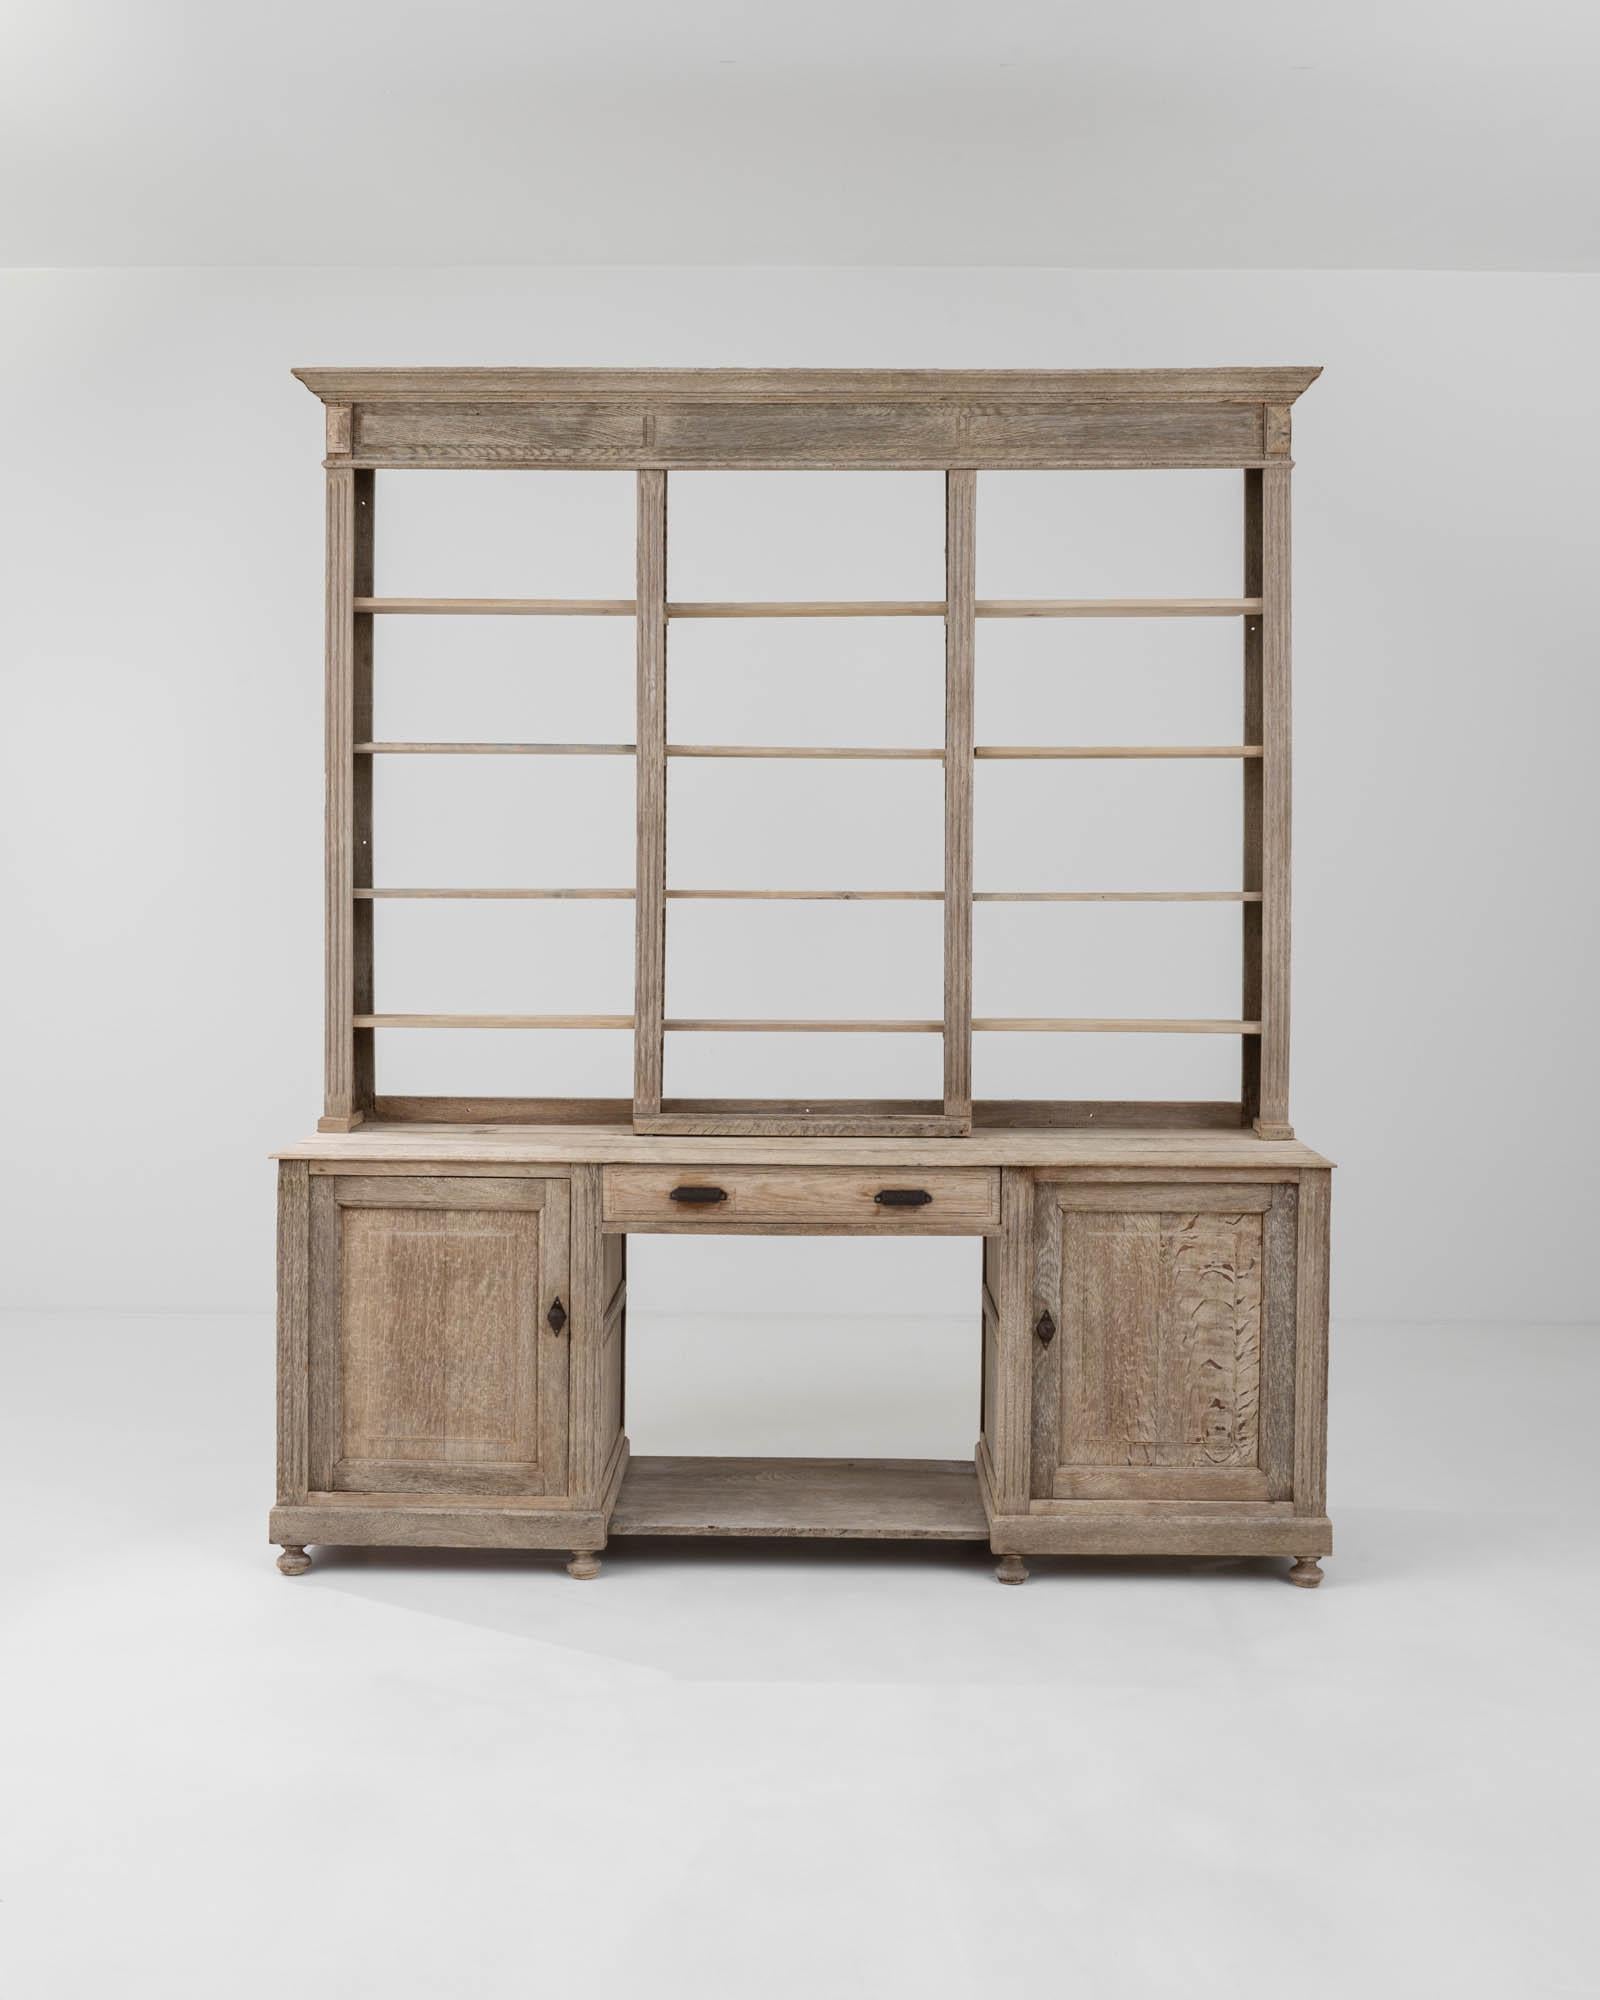 This unique étagère cabinet was handcrafted from quality European oak in Brussels, Belgium, as the metal plate indicates, during the 19th century.. The distinctive structure of this à deux corps chest is characterized by three sections, providing